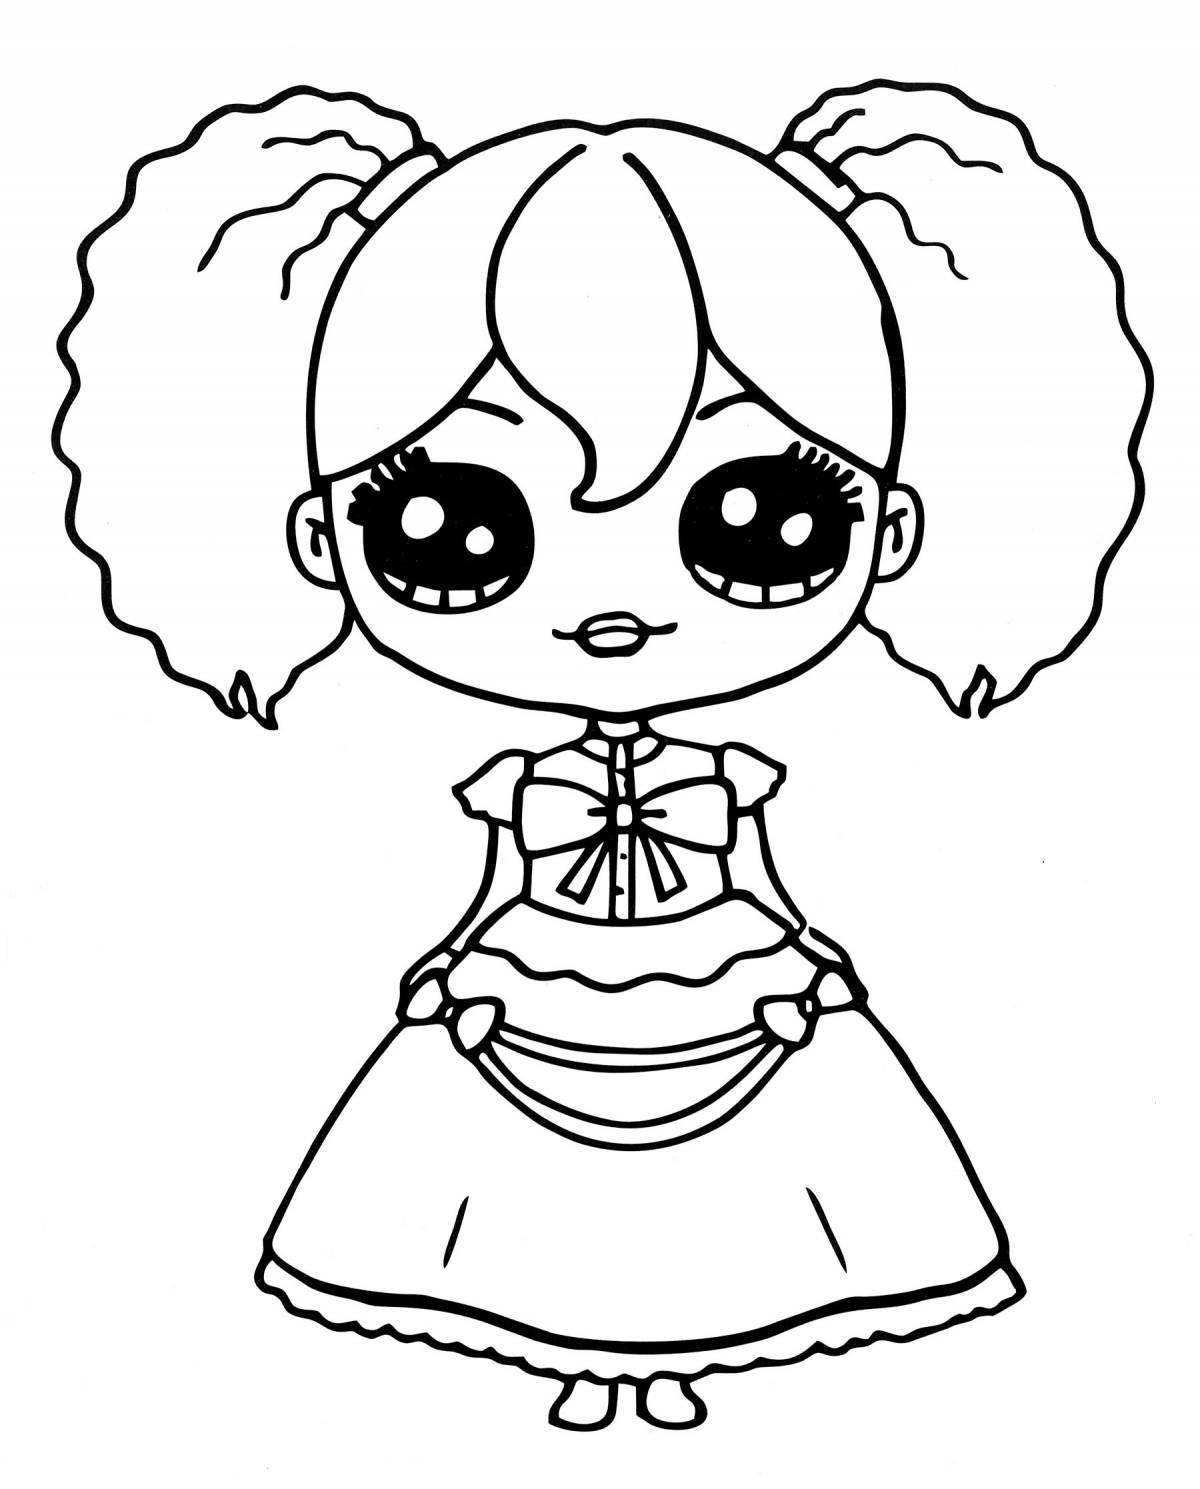 Poppy playtime animated coloring page